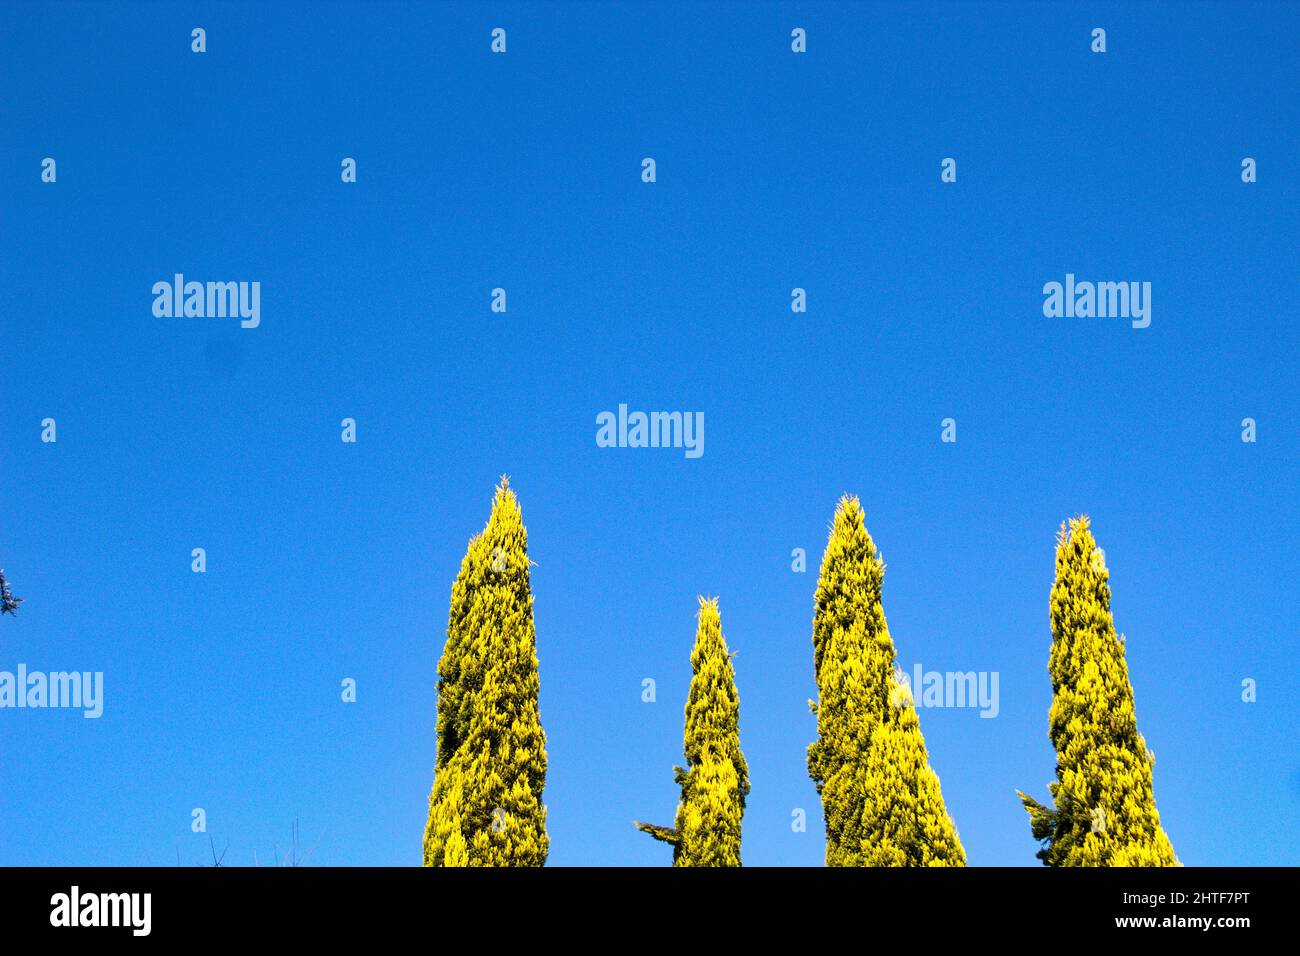 Low angle shot of conifer trees with the blue sky in the background Stock Photo